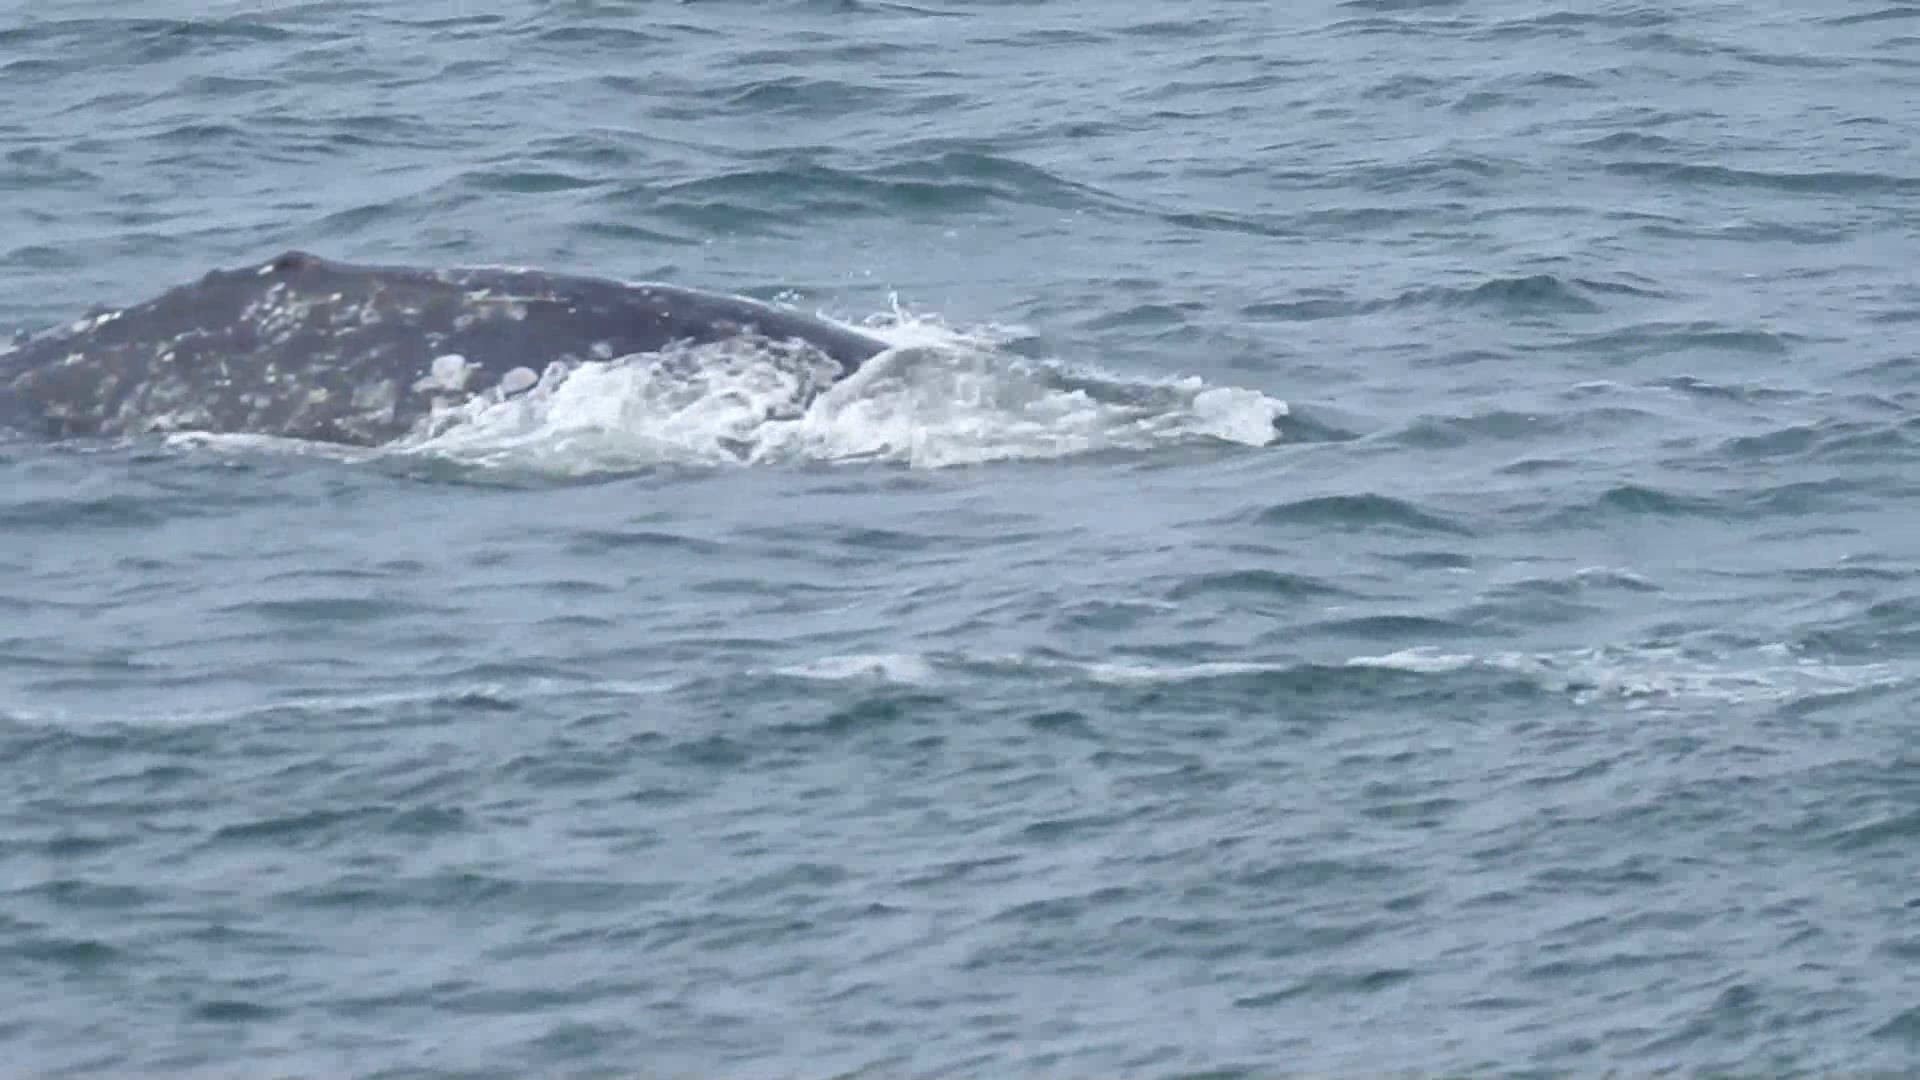 The first clip in this video is of a whale breaching on June 7. The second and third clips are of various whale activity in front of the Whale Watch Center.